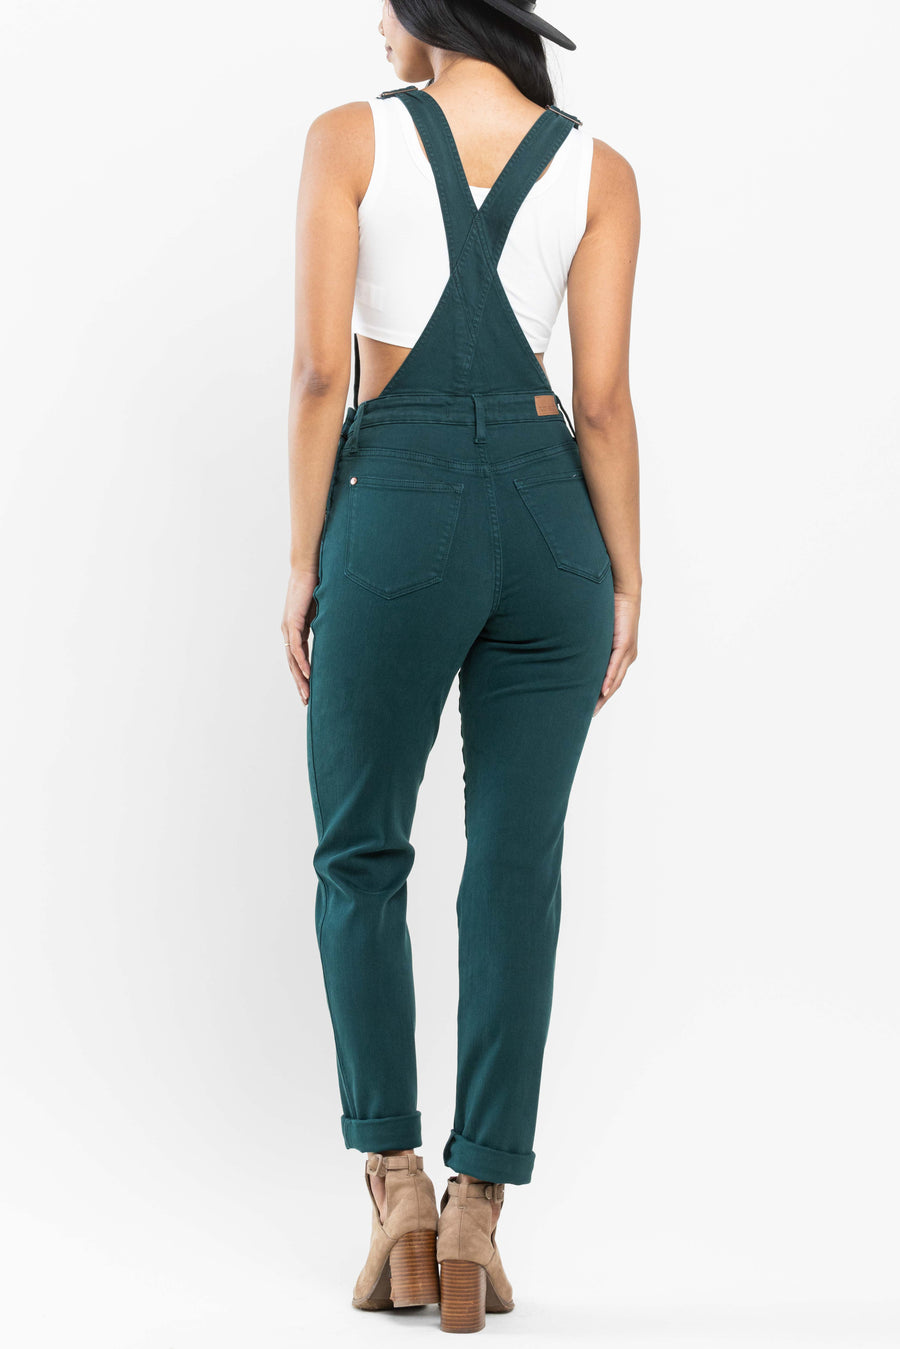 Naelly Teal Double Cuff Boyfriend Overall - PLUS